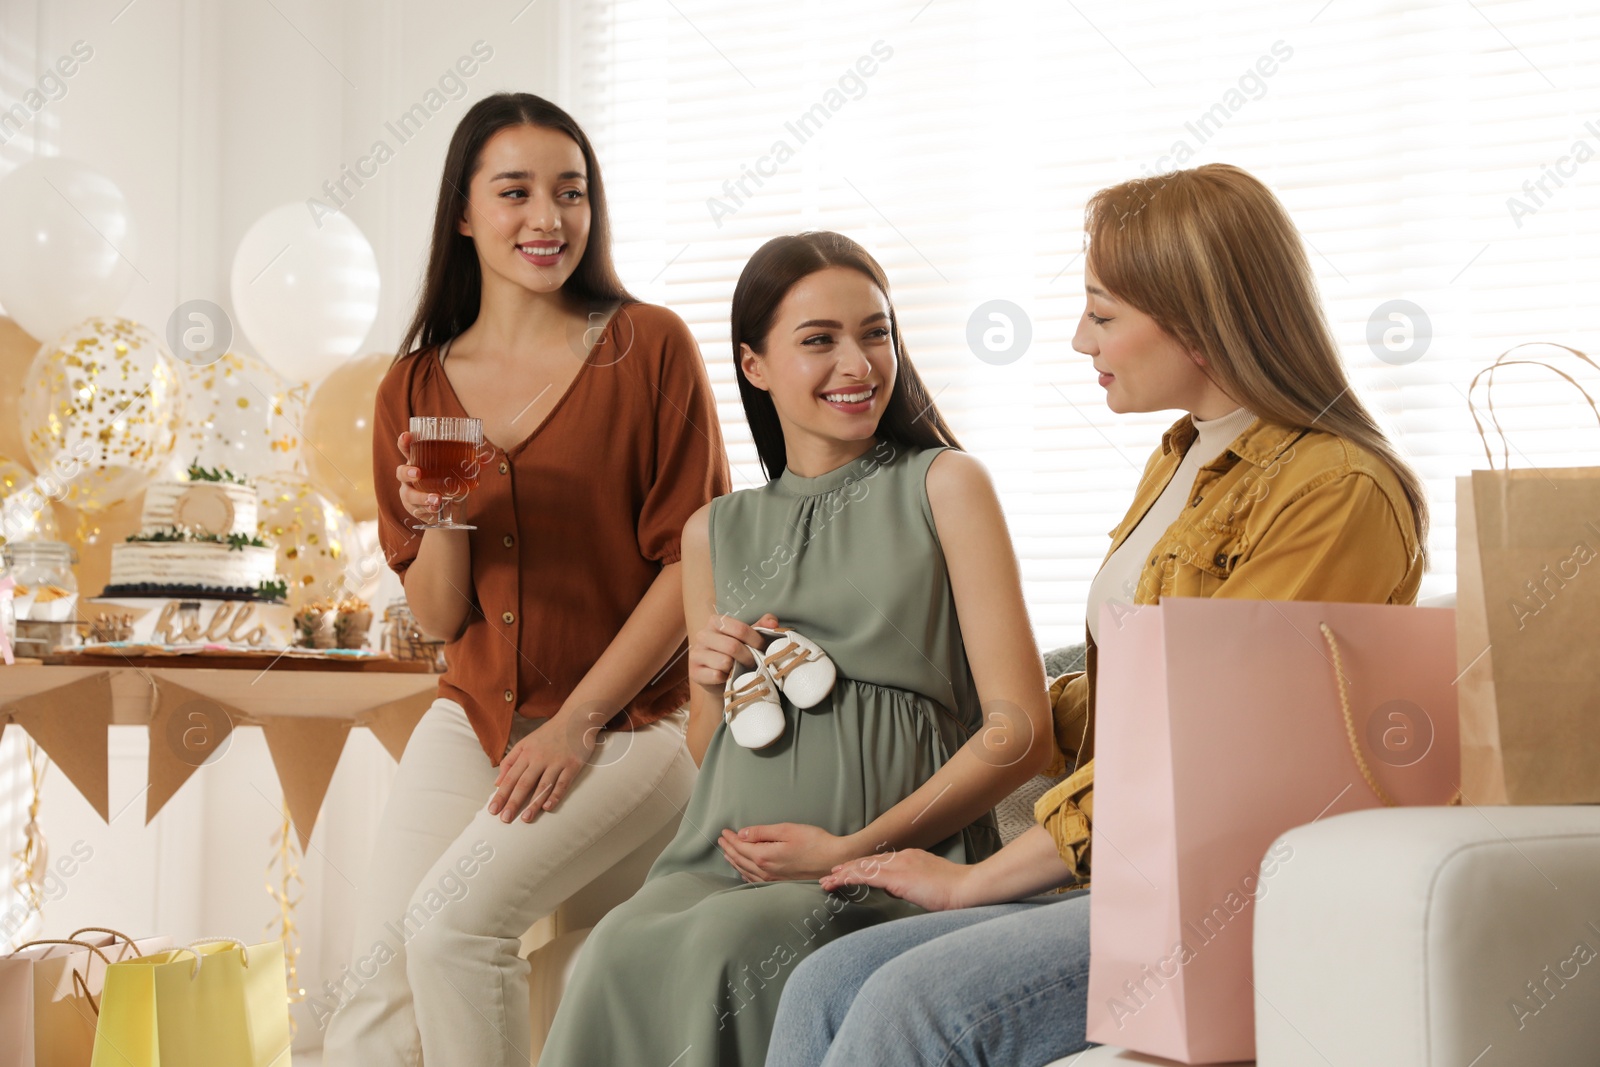 Photo of Happy pregnant woman spending time with friends at baby shower party